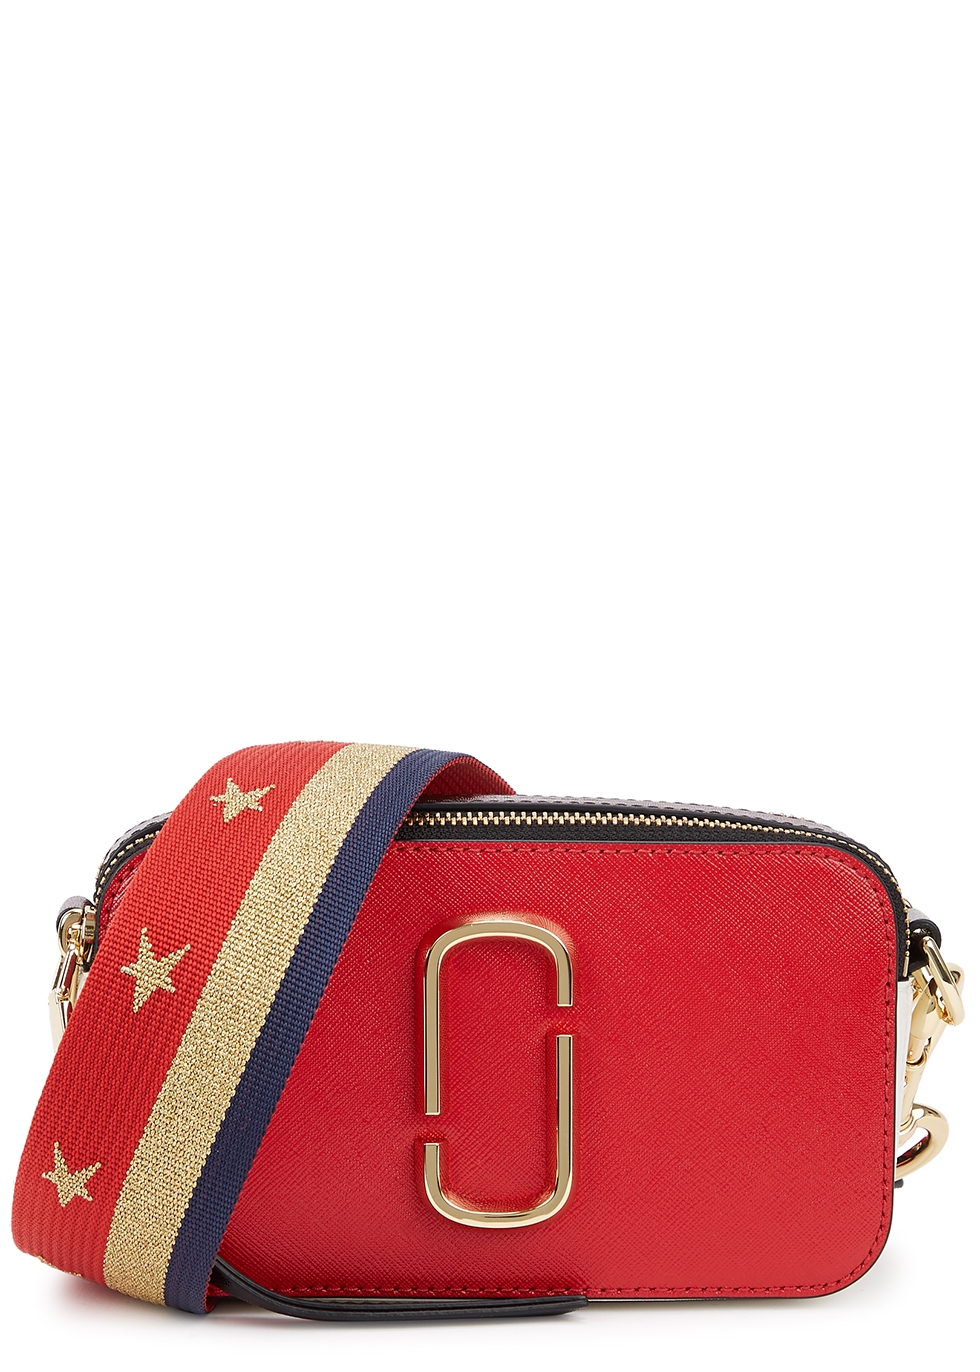 Marc Jacobs The Americana Snapshot panelled leather cross-body bag